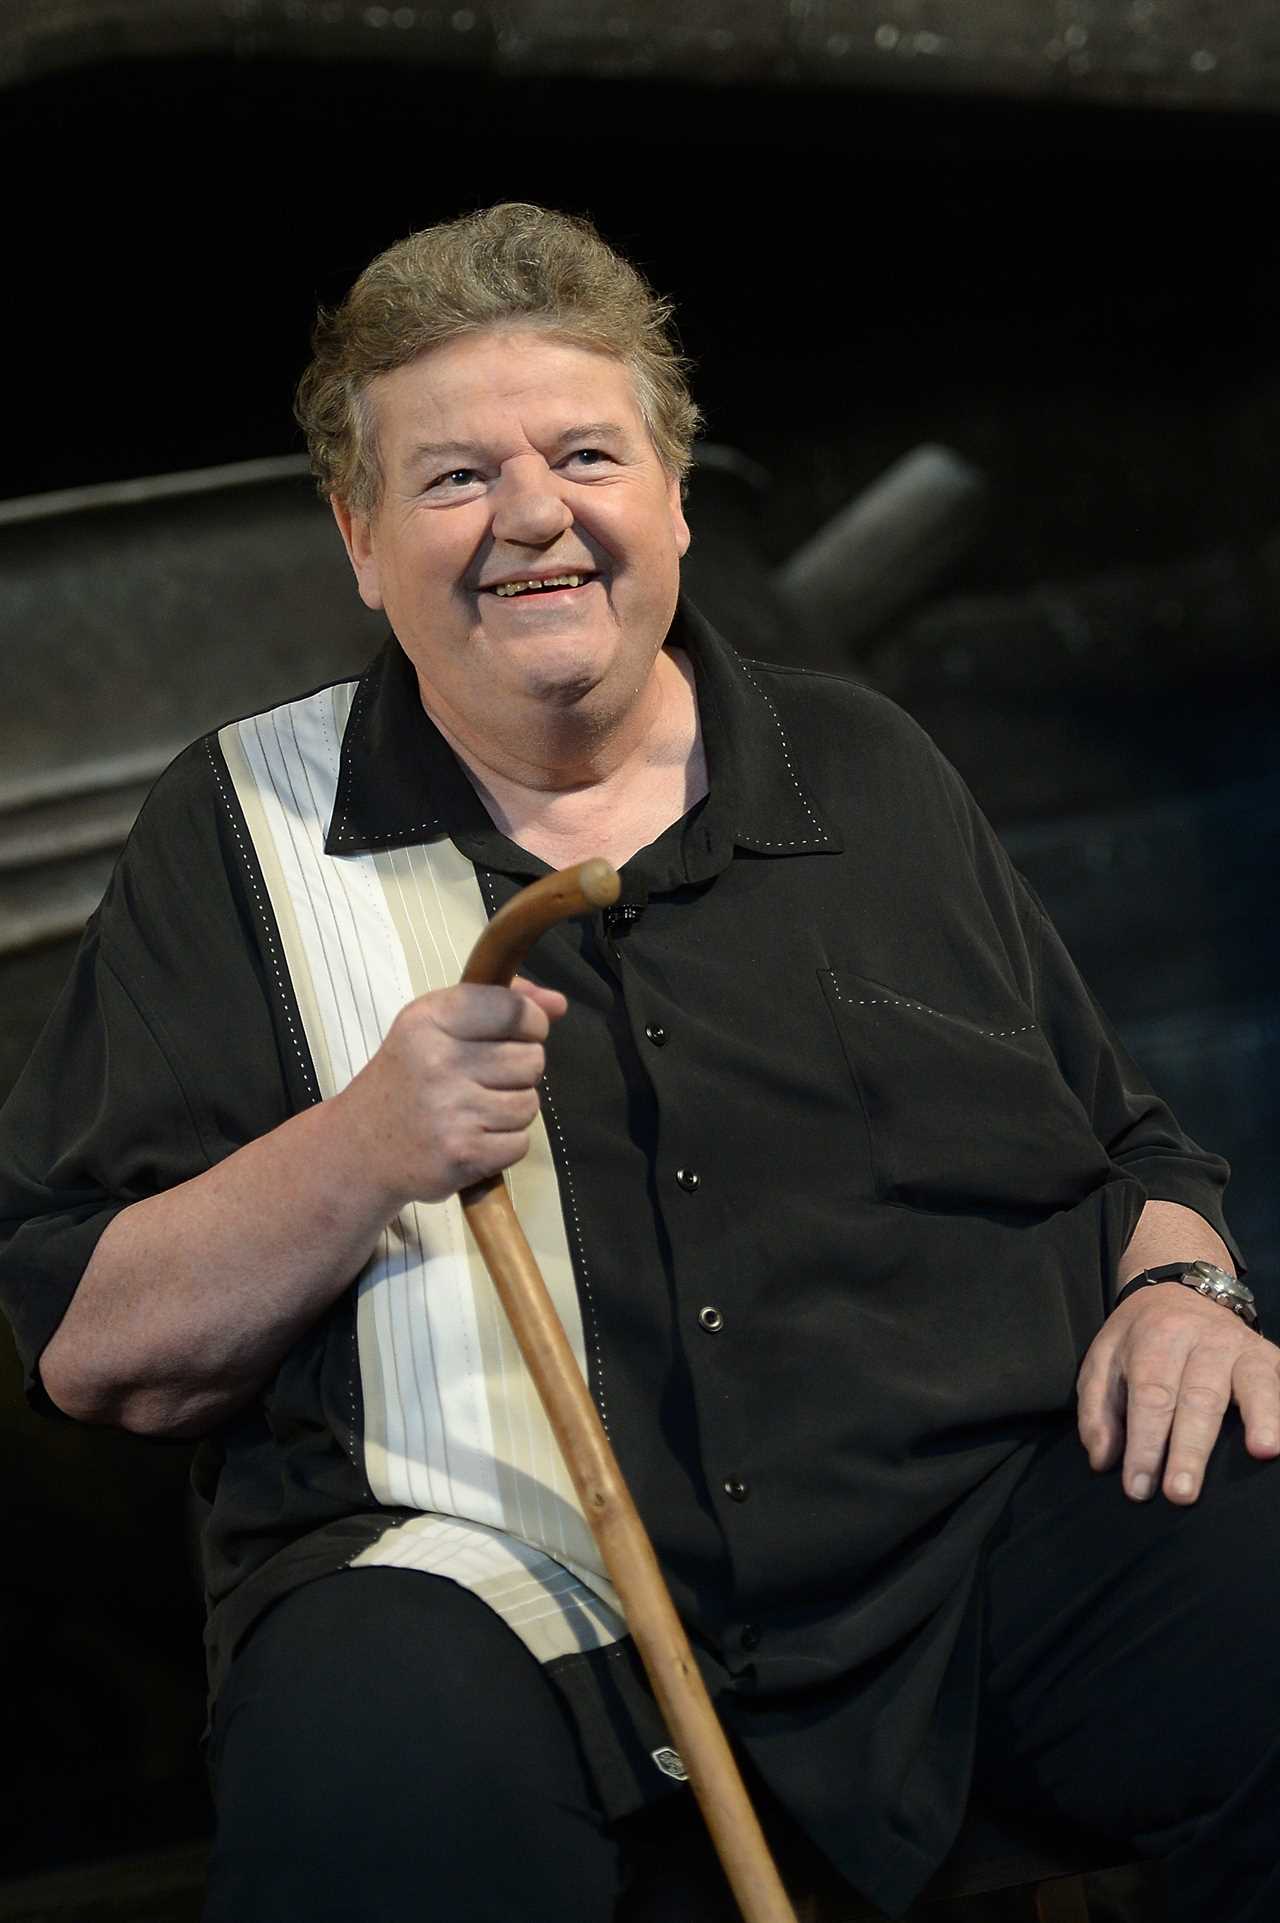 Harry Potter author J.K Rowling leads tributes to Hagrid star Robbie Coltrane as he dies age 72